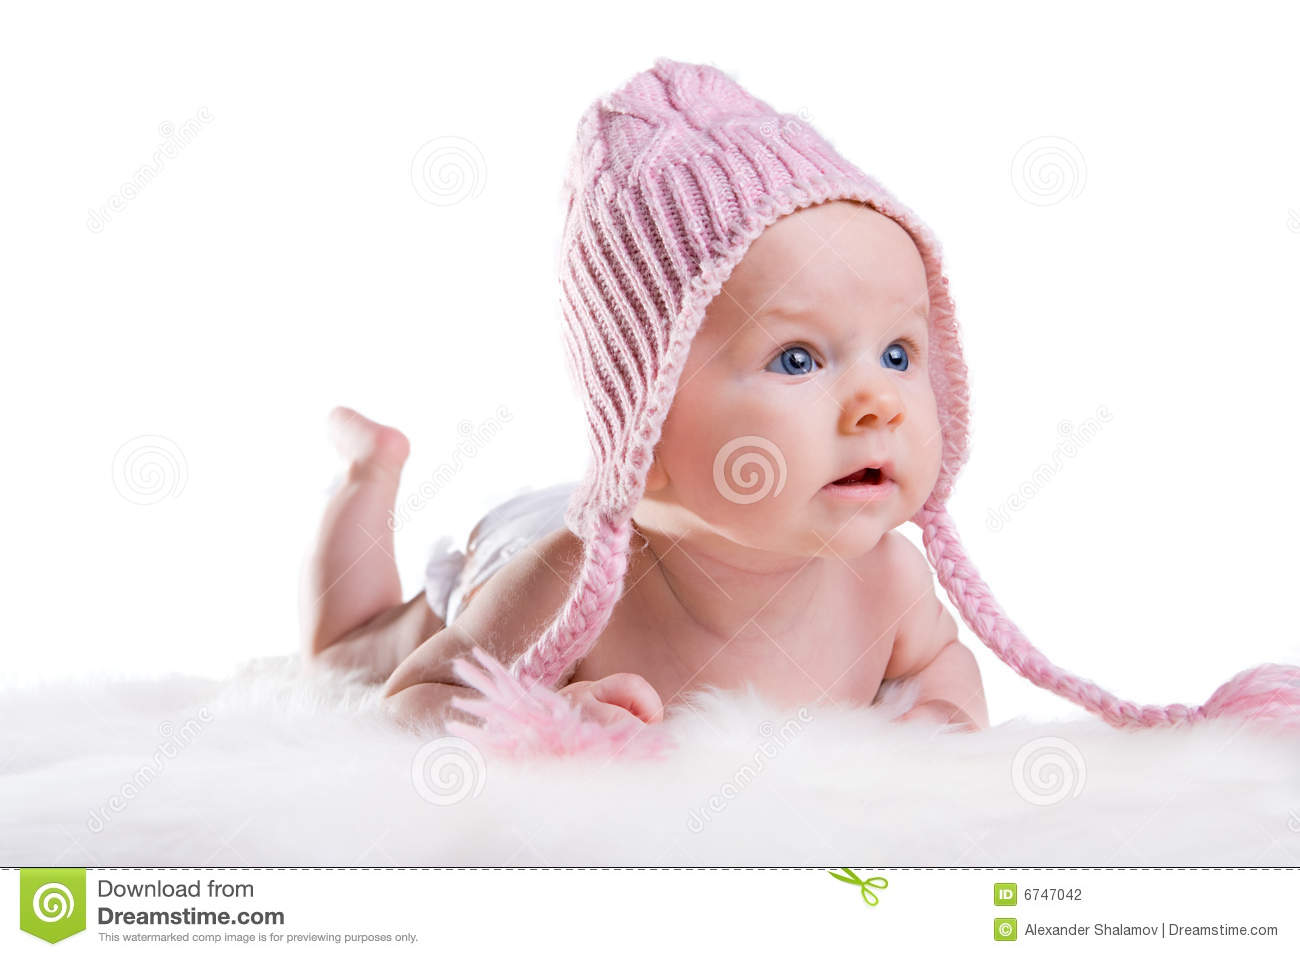 7 Winter Baby Photography Images